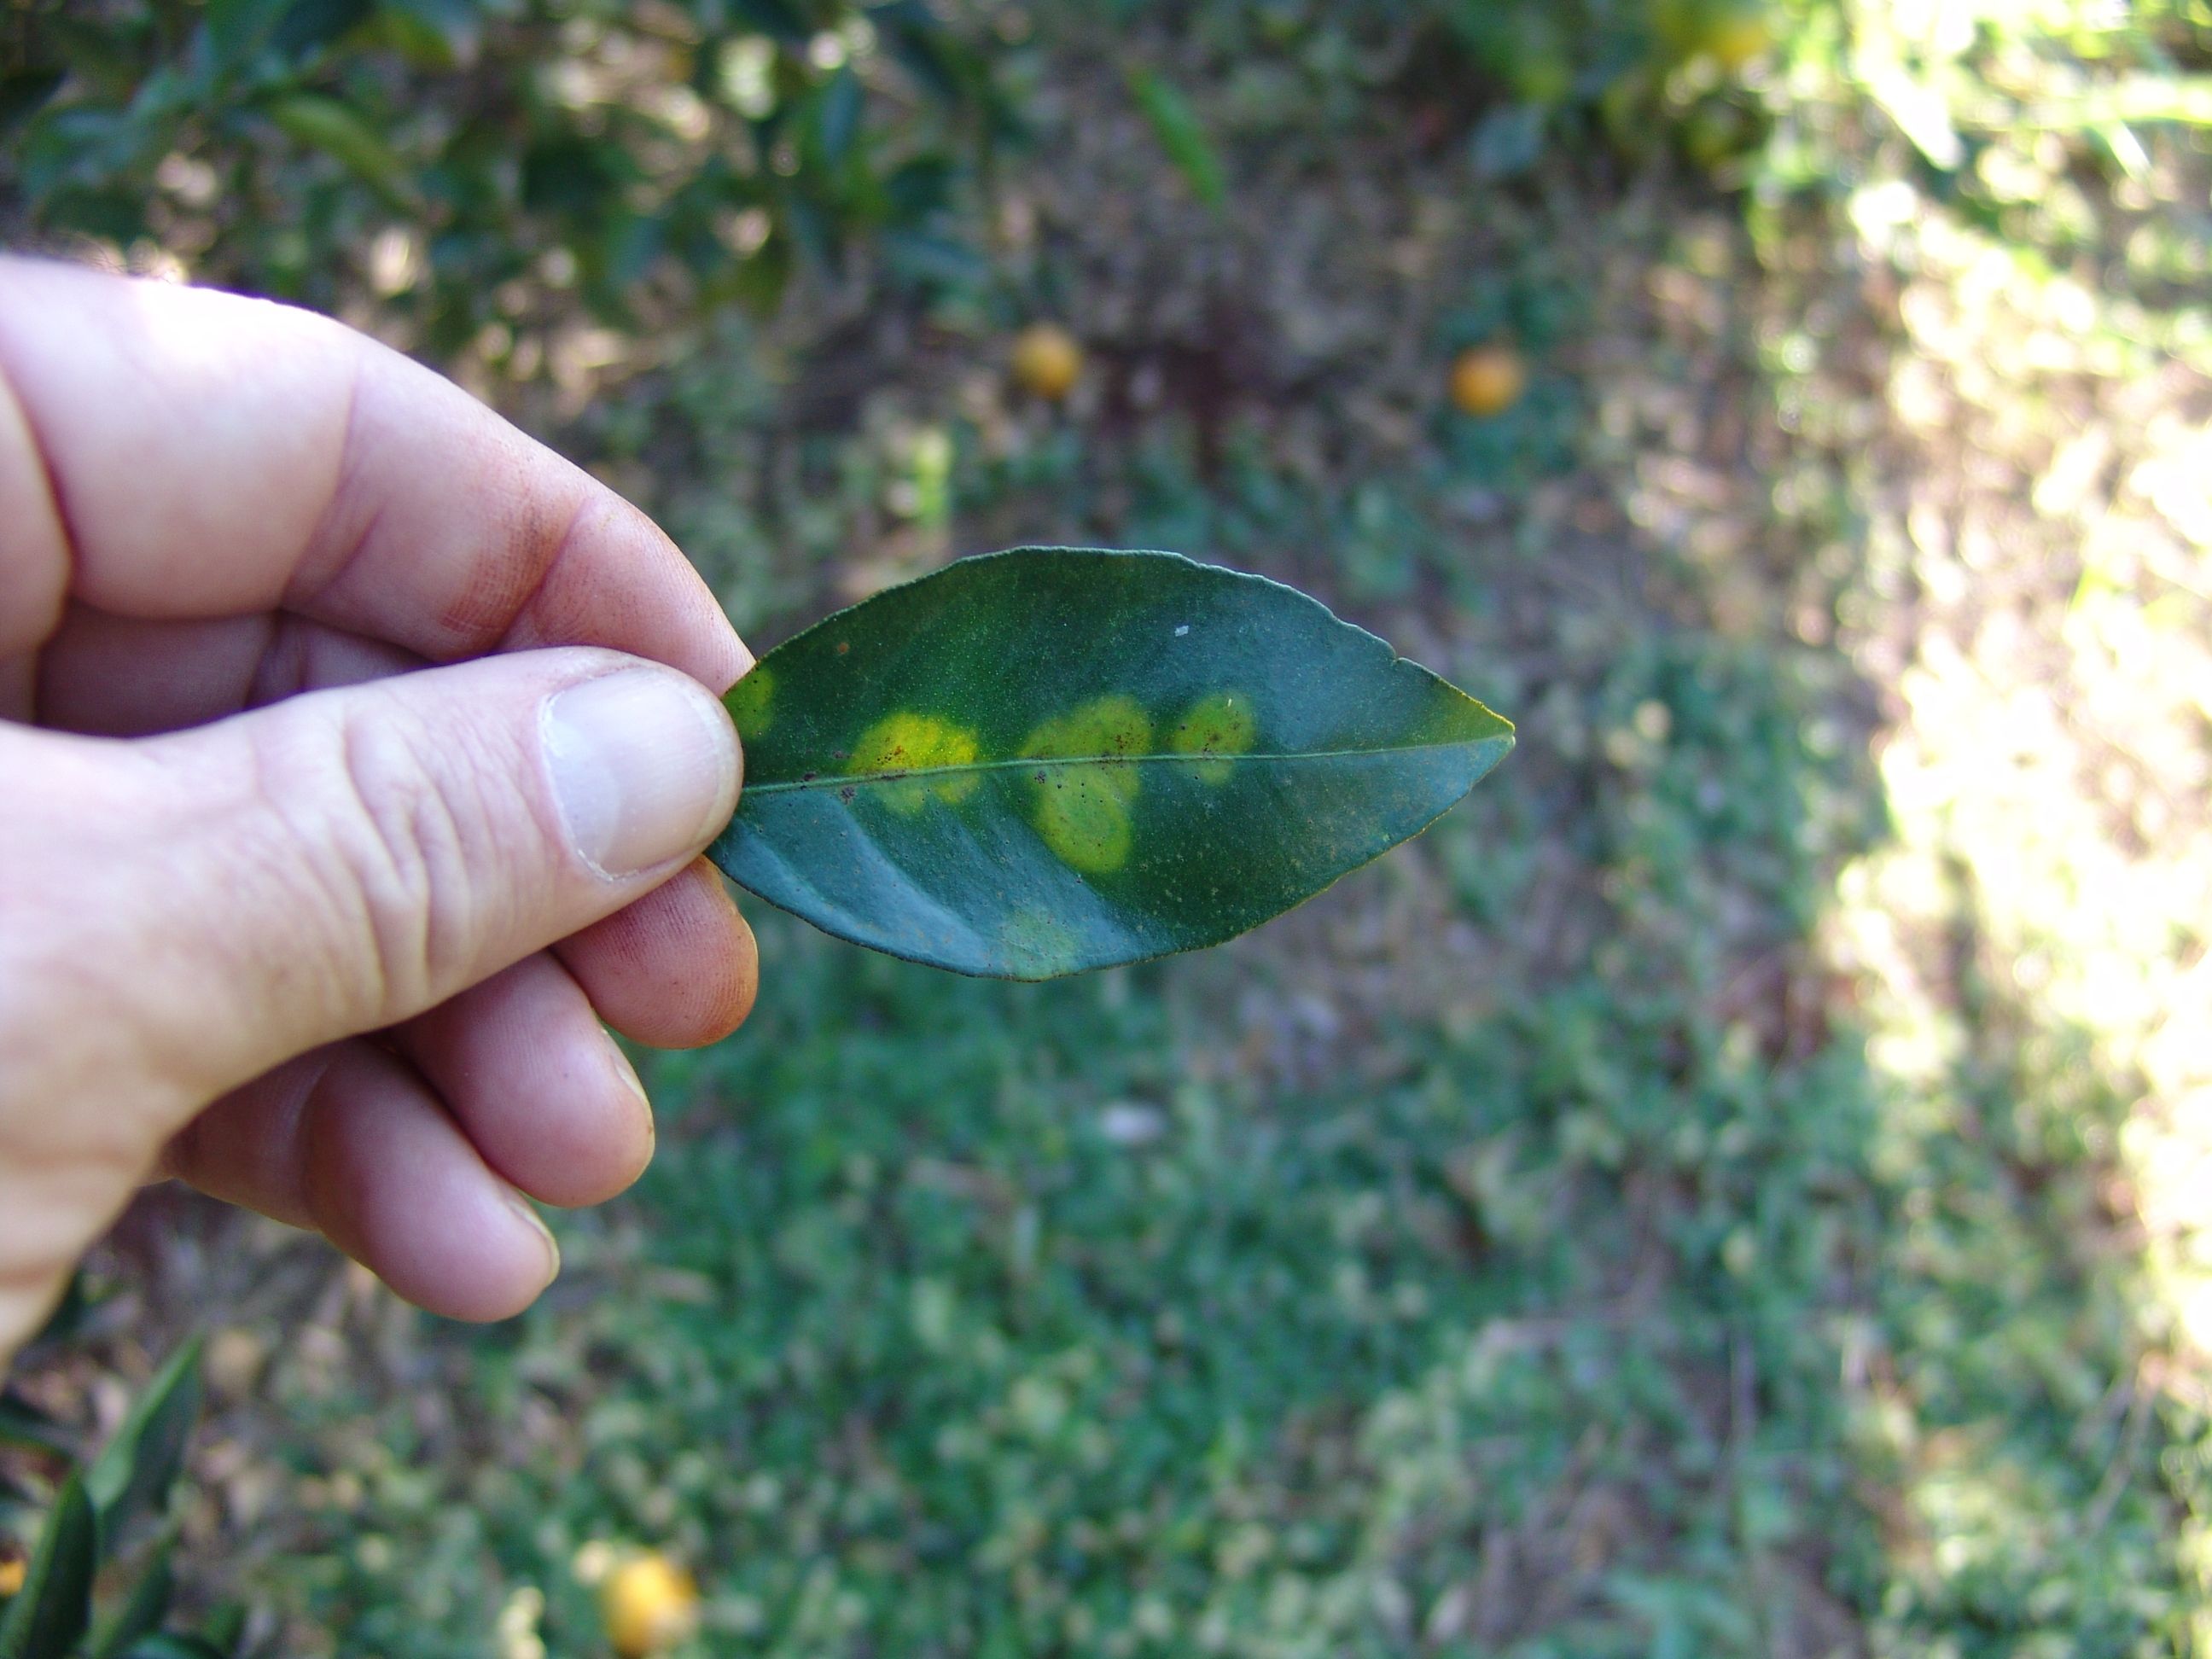 Chlorotic circular lesions (zone pattern) on upper side of leaf.